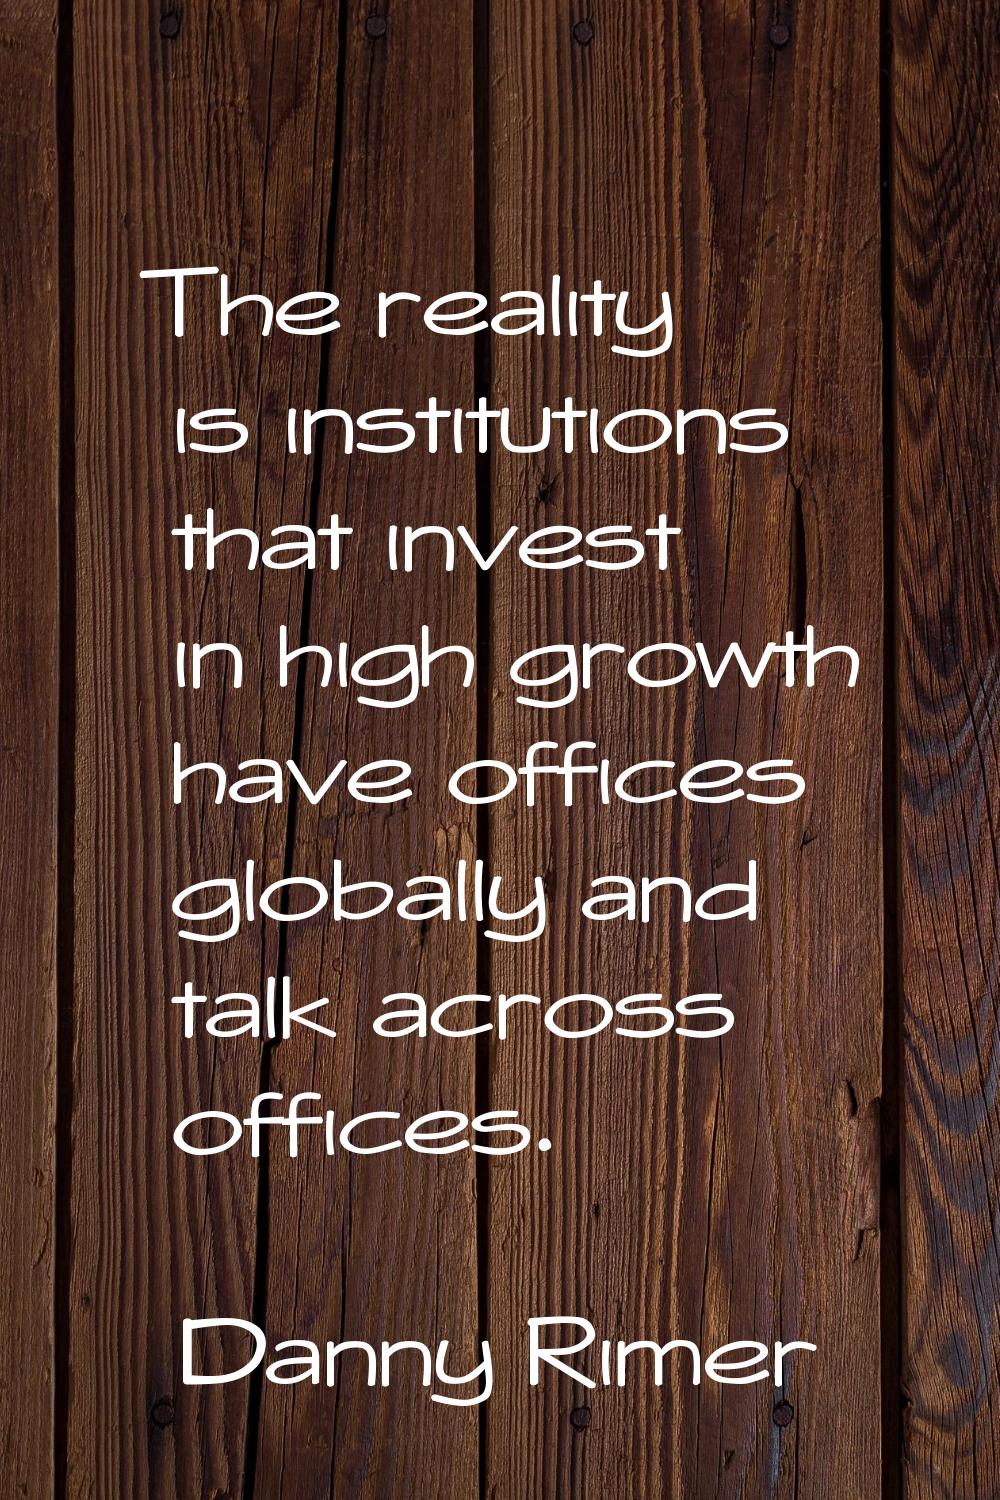 The reality is institutions that invest in high growth have offices globally and talk across office